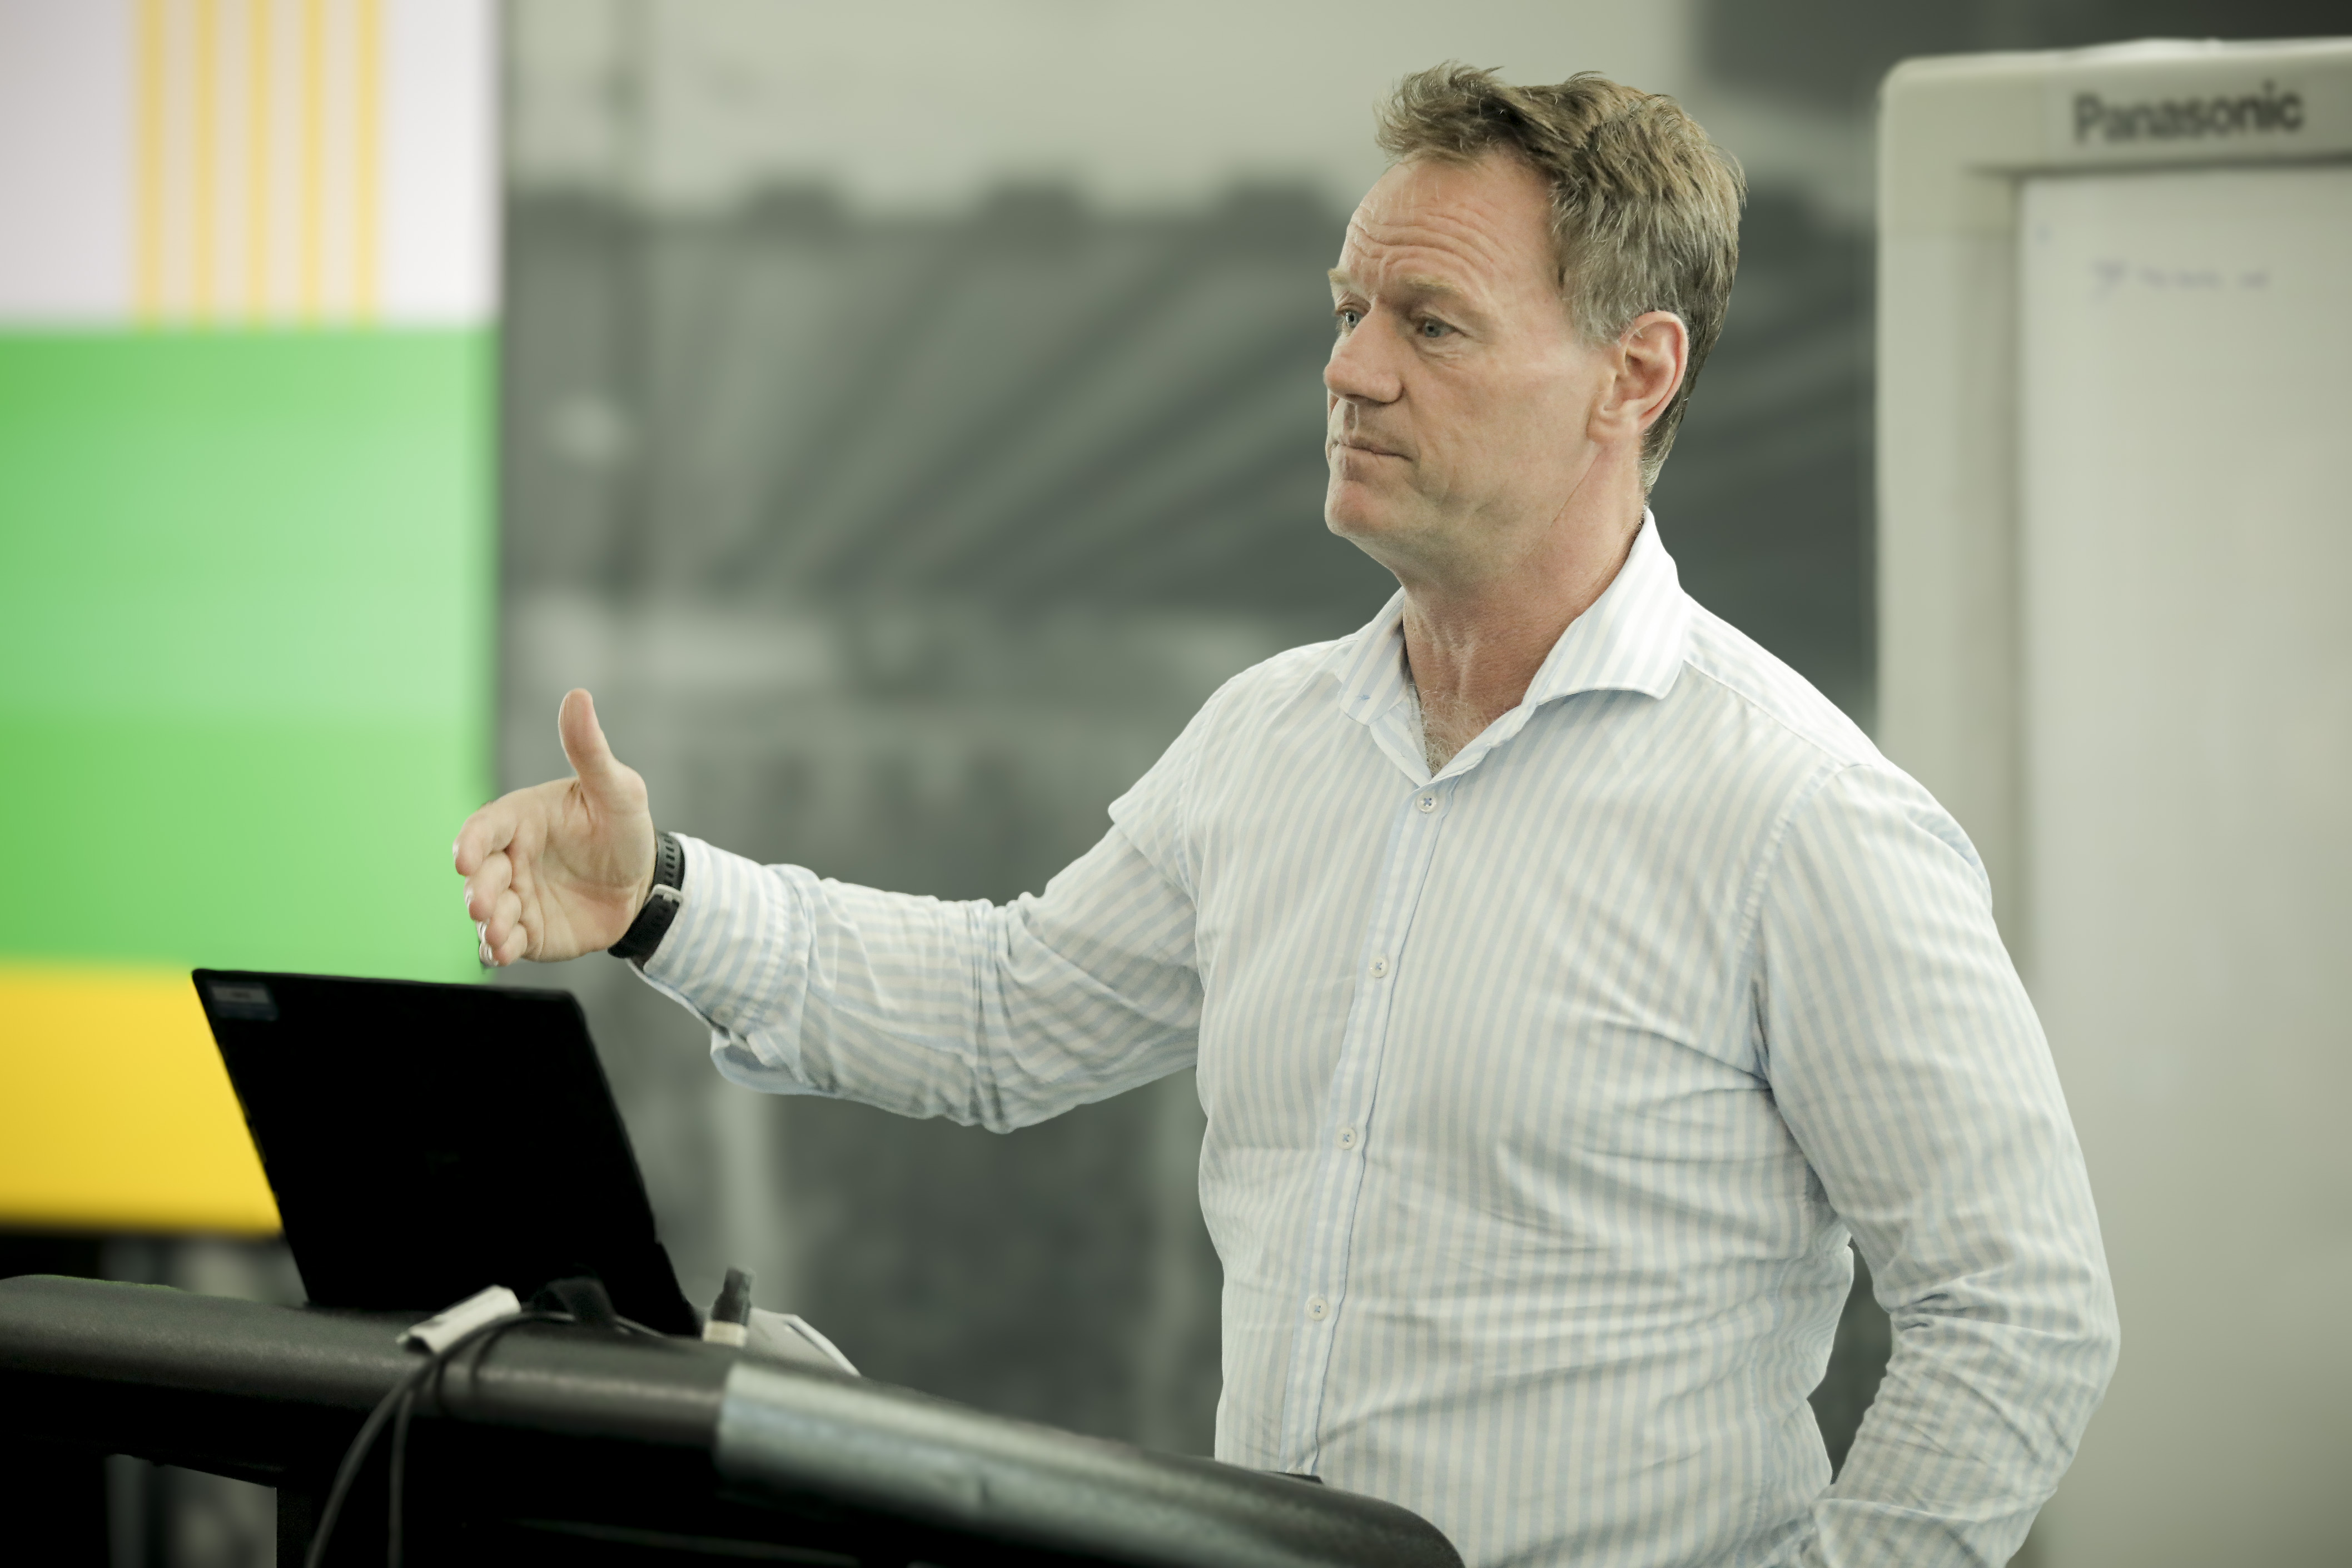 Pat Howard, Executive General Manager of Strategy Insights & Innovation at the Australian Sports Commission giving the opening address at the Responsible AI in Sport workshop at the AIS.